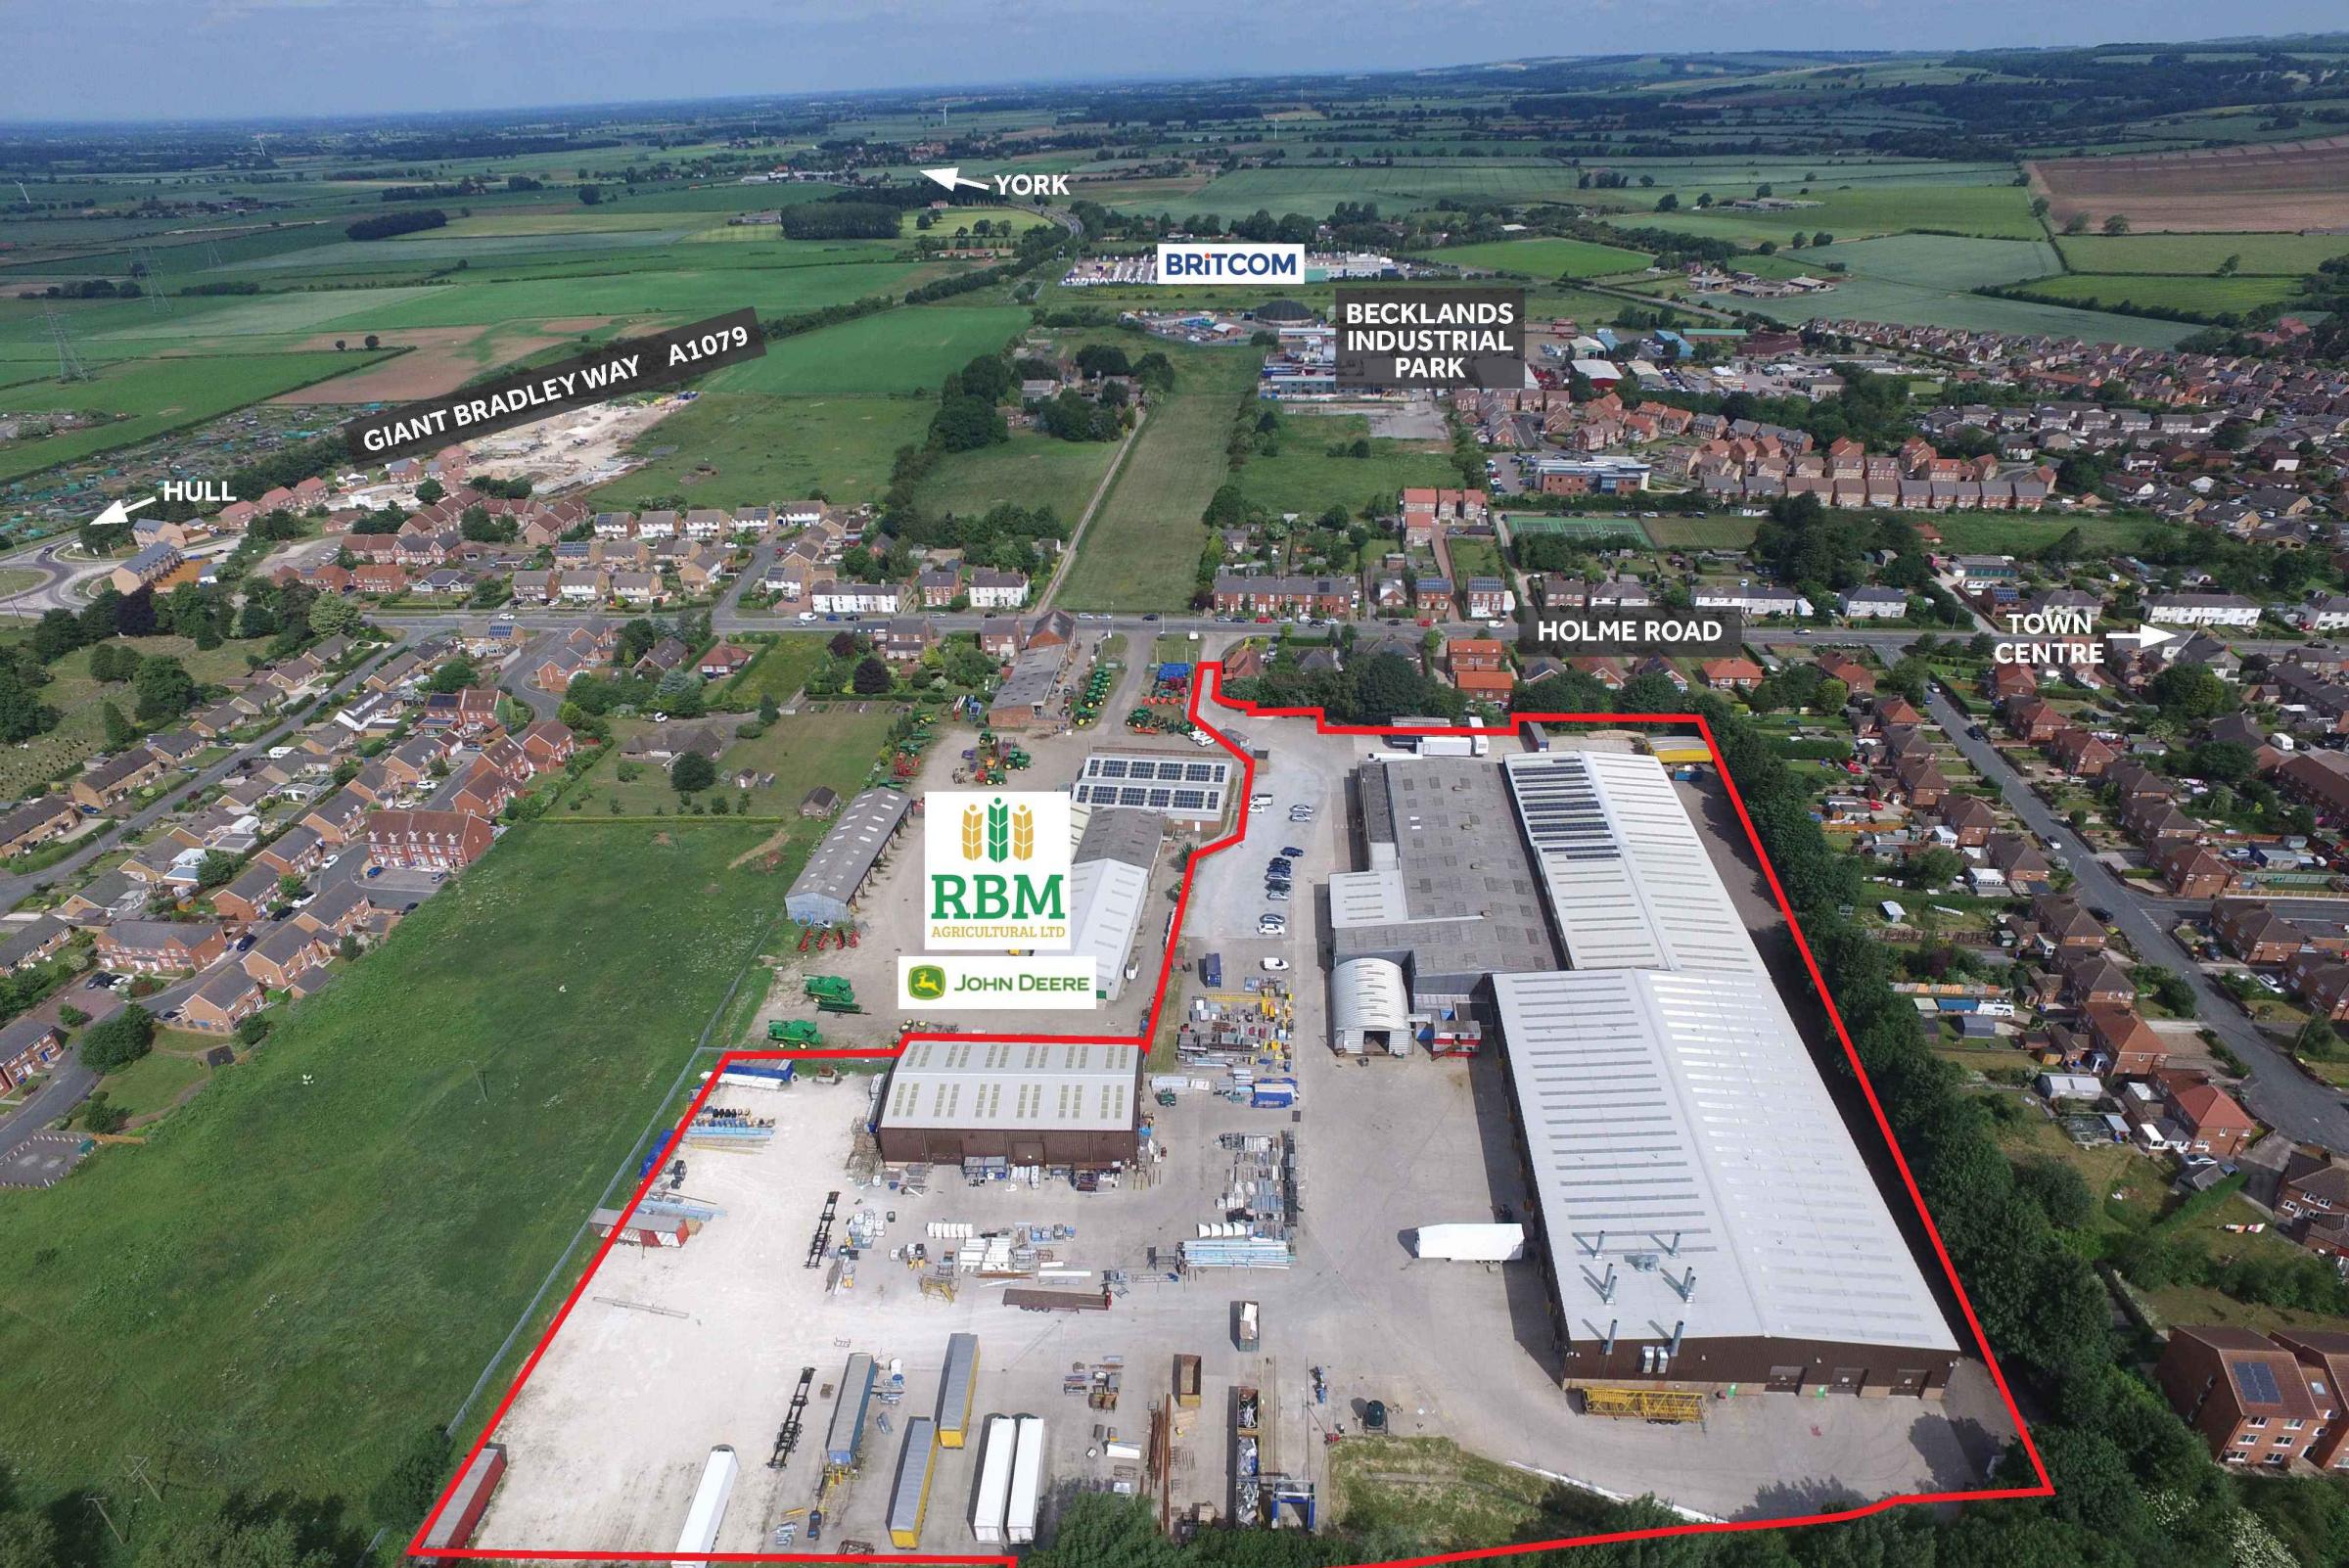 Sale of large commercial building could lead to jobs boost